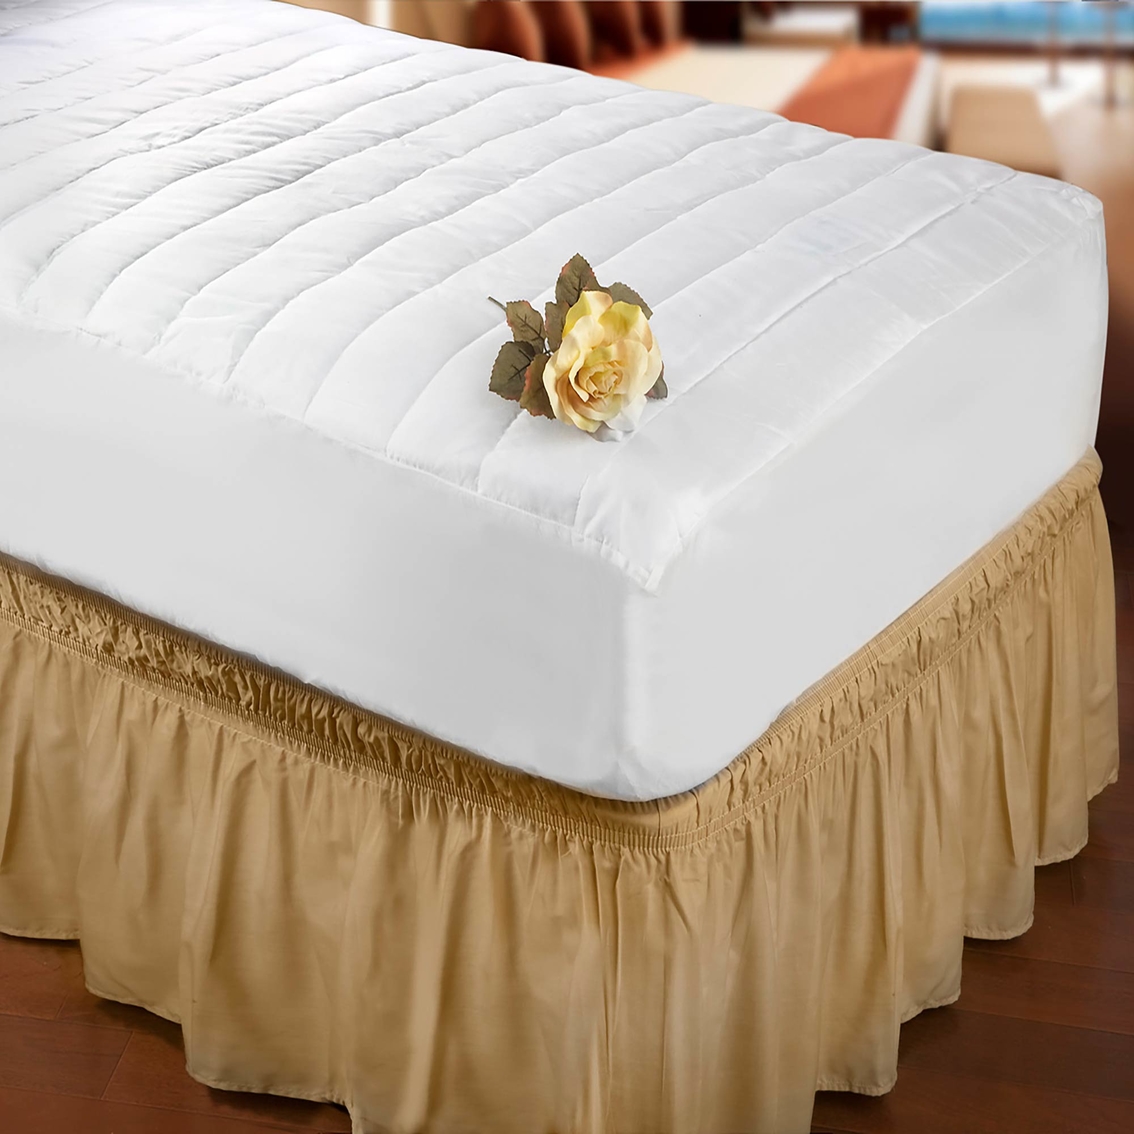 Home Details Kennedy's Home Collection Antibacterial Mattress Pad - Image 4 of 4